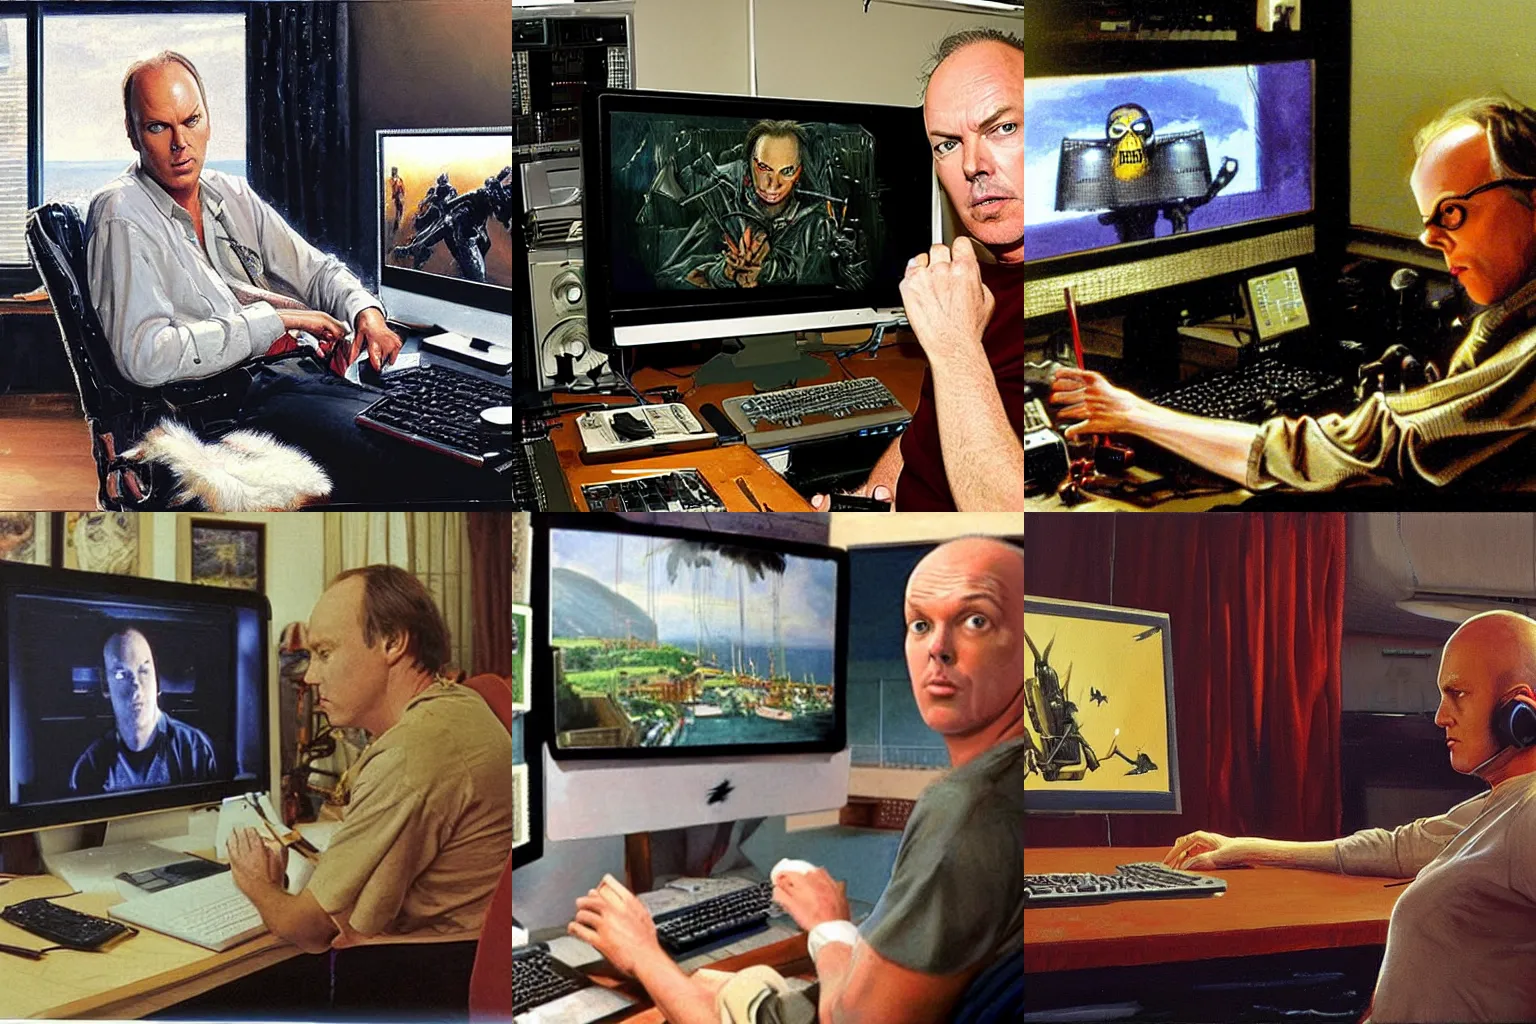 Prompt: michael keaton in his computer with thepiratebay on the screen, painting by James gurney